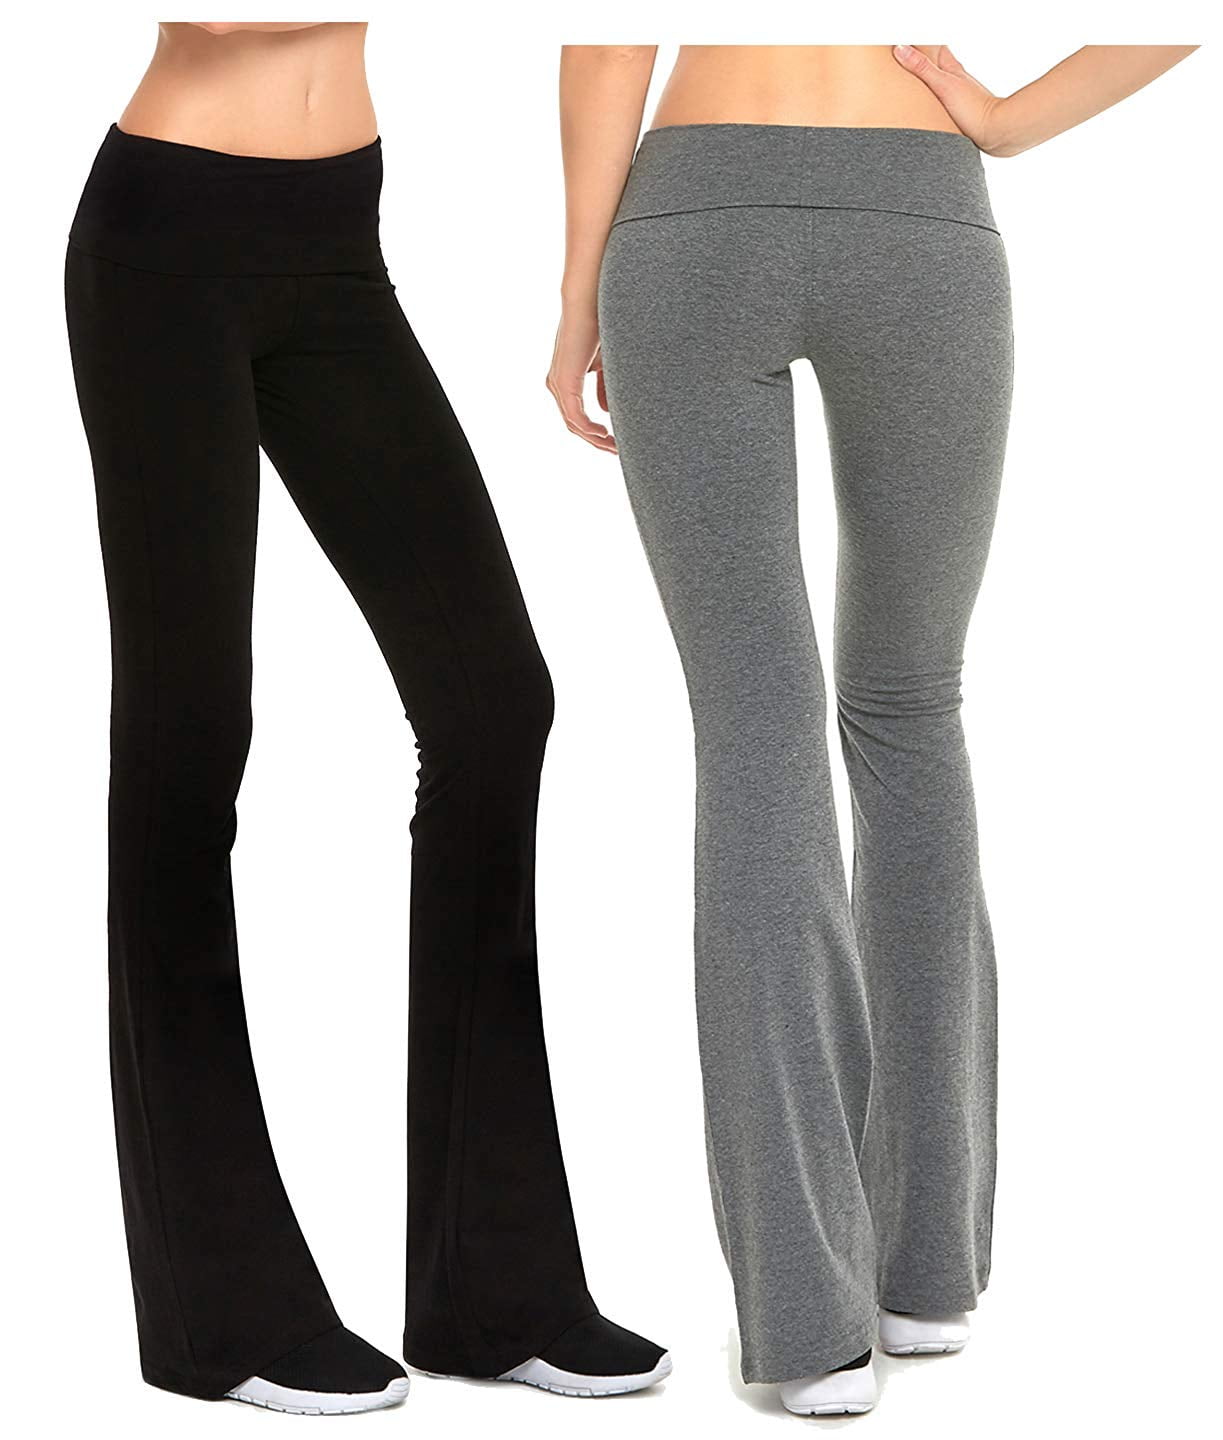 Yoga Pants With Flared Legs  International Society of Precision